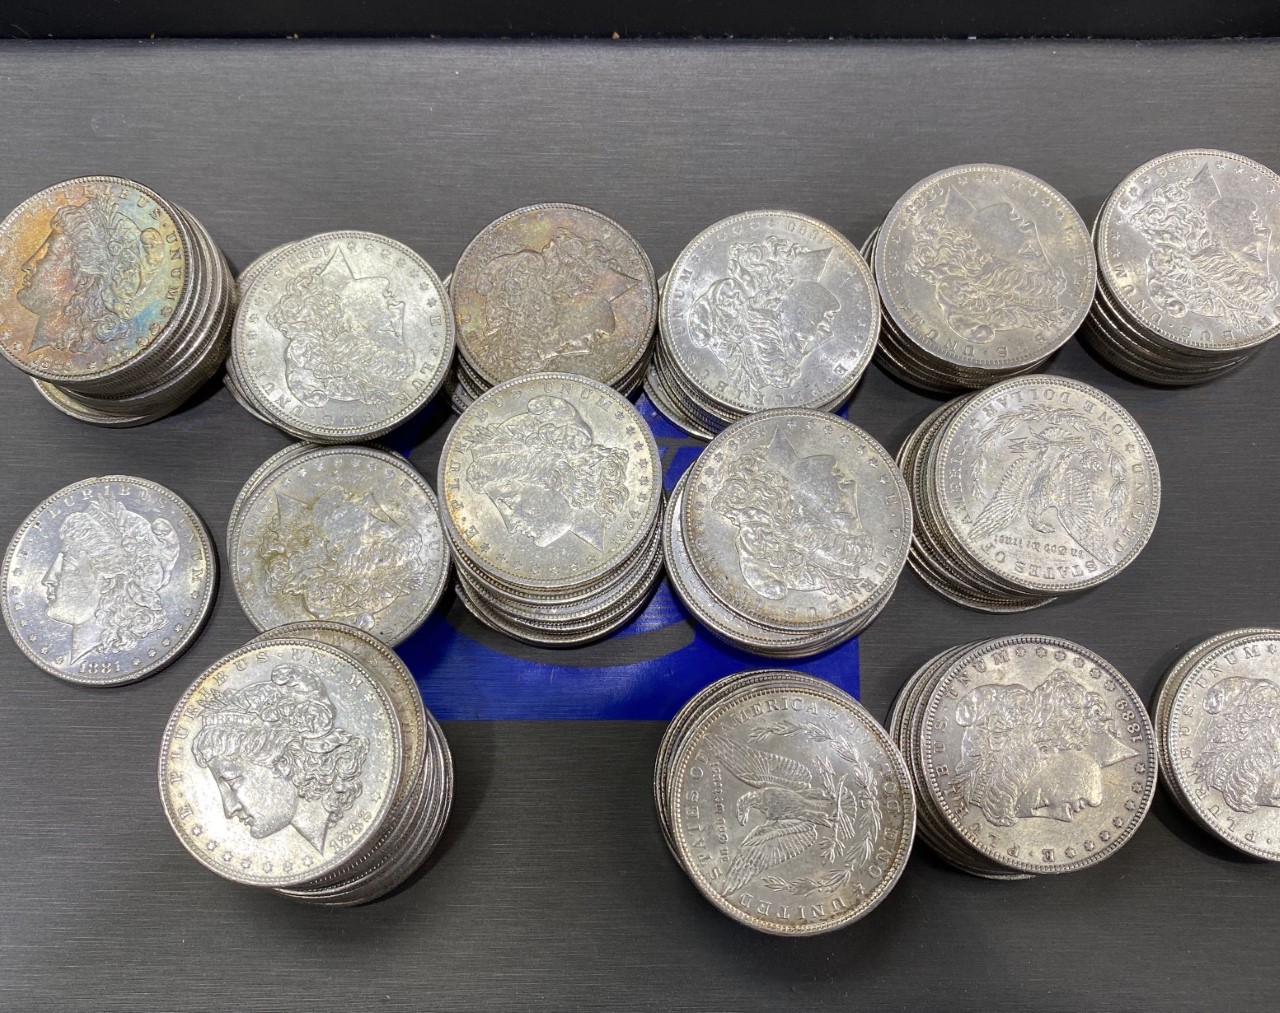 Purchased a stack of Morgan Silver Dollars. We are always buying and selling coins.